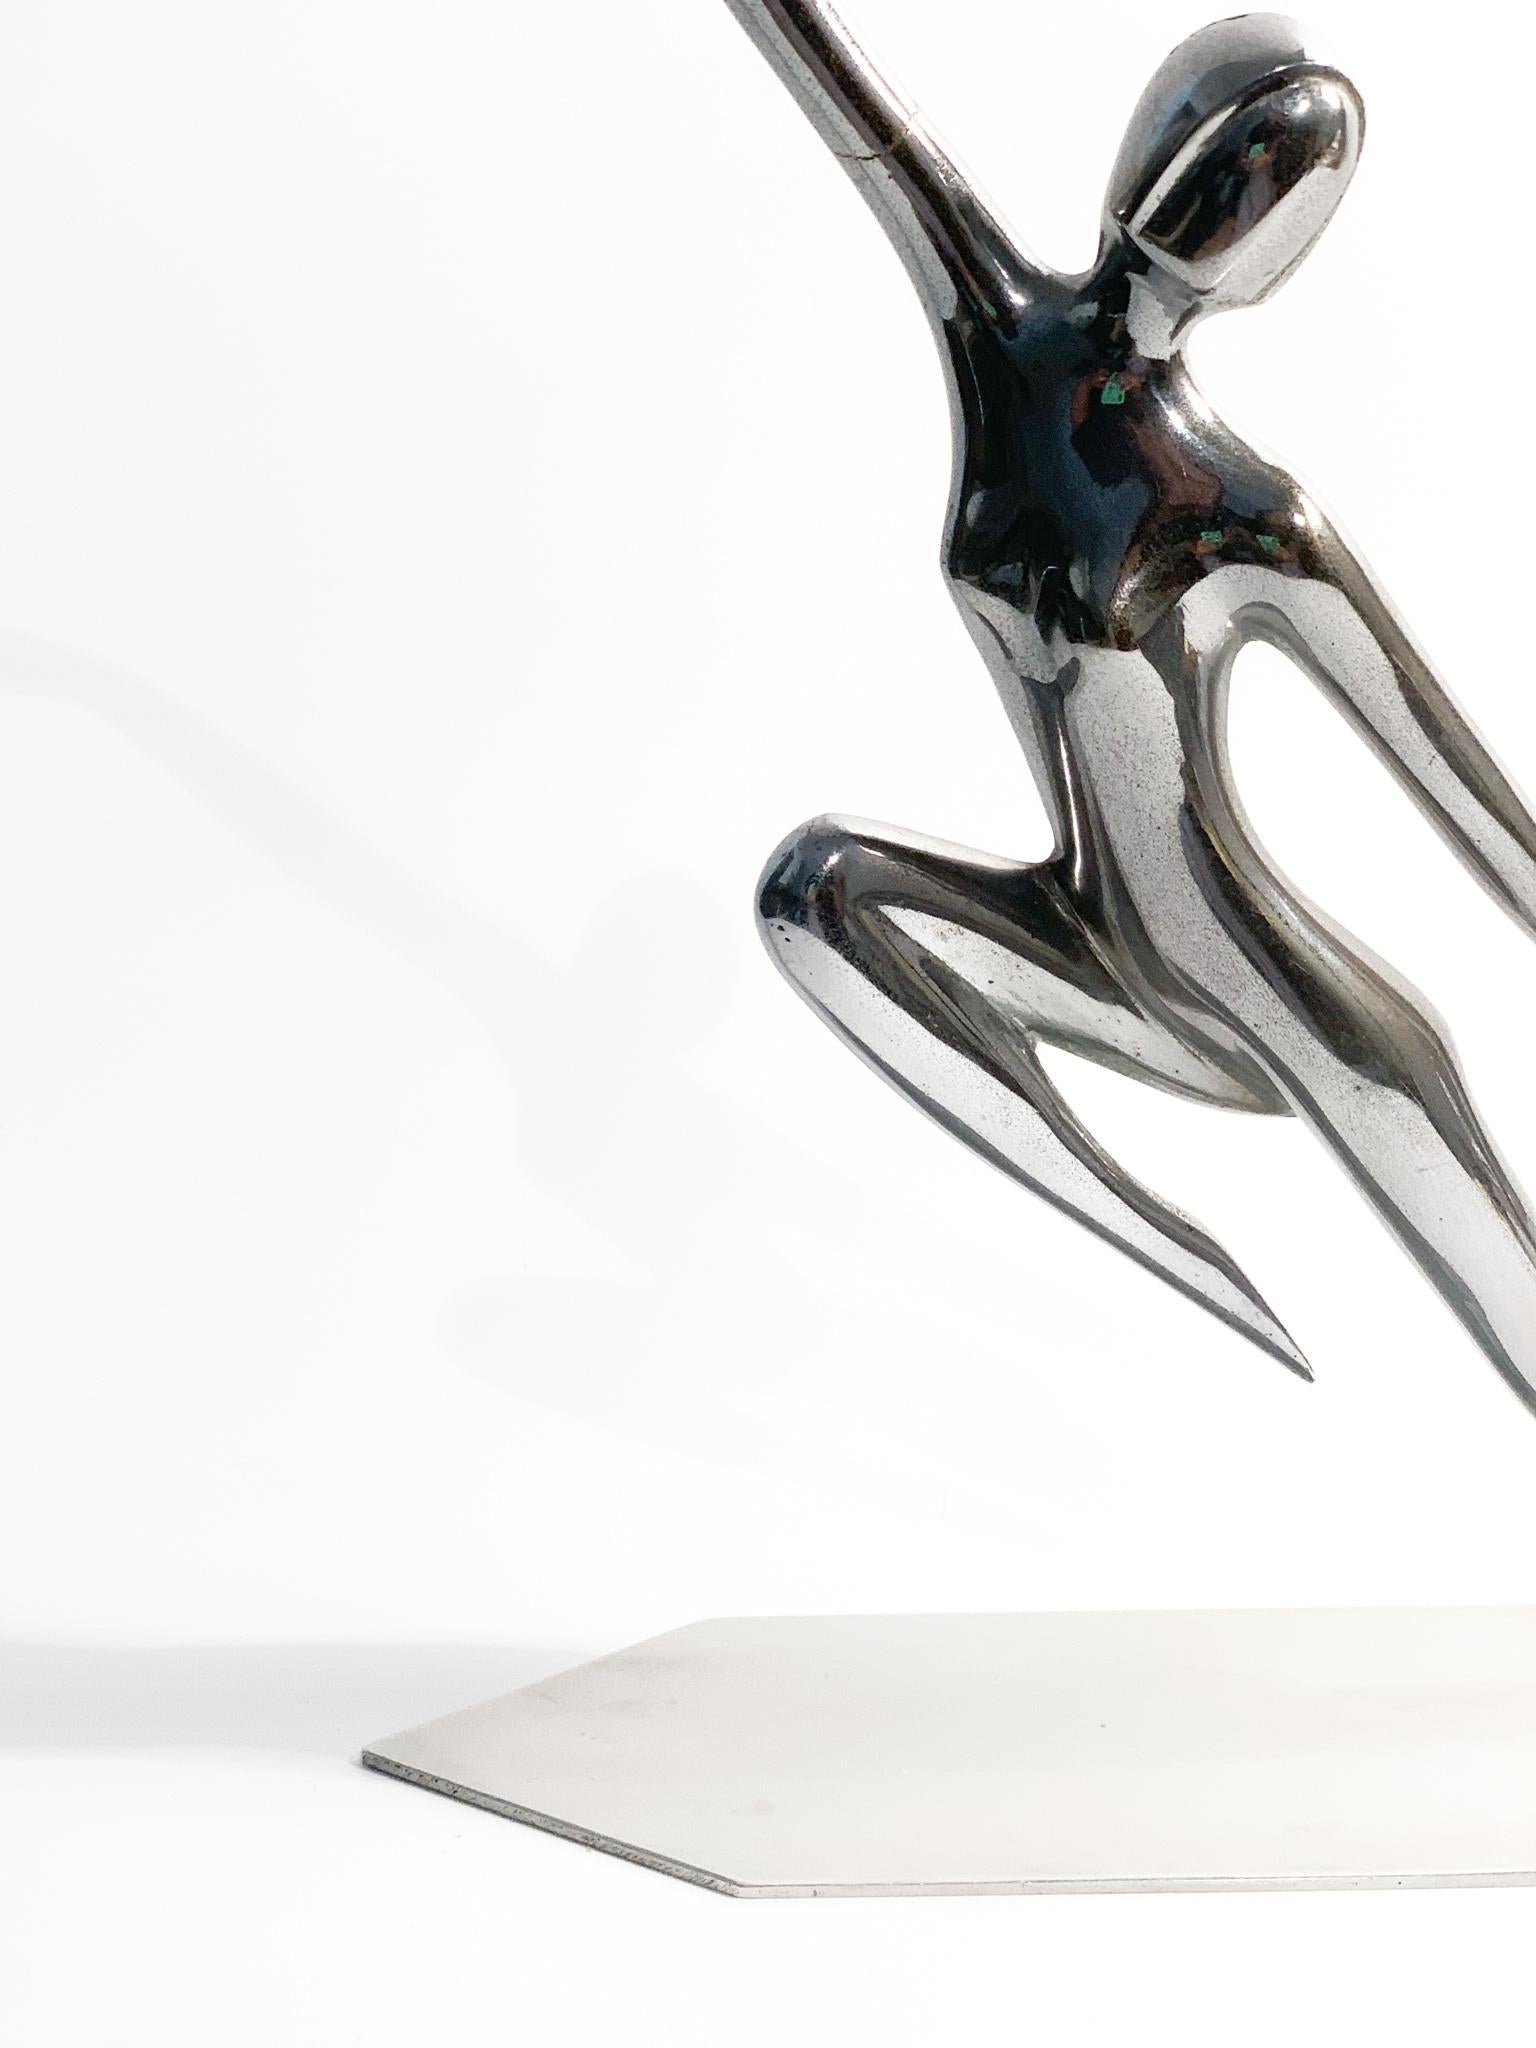 Mid-20th Century Italian Decò Sculpture of a Dancer in Artistic Metal from the 1930s